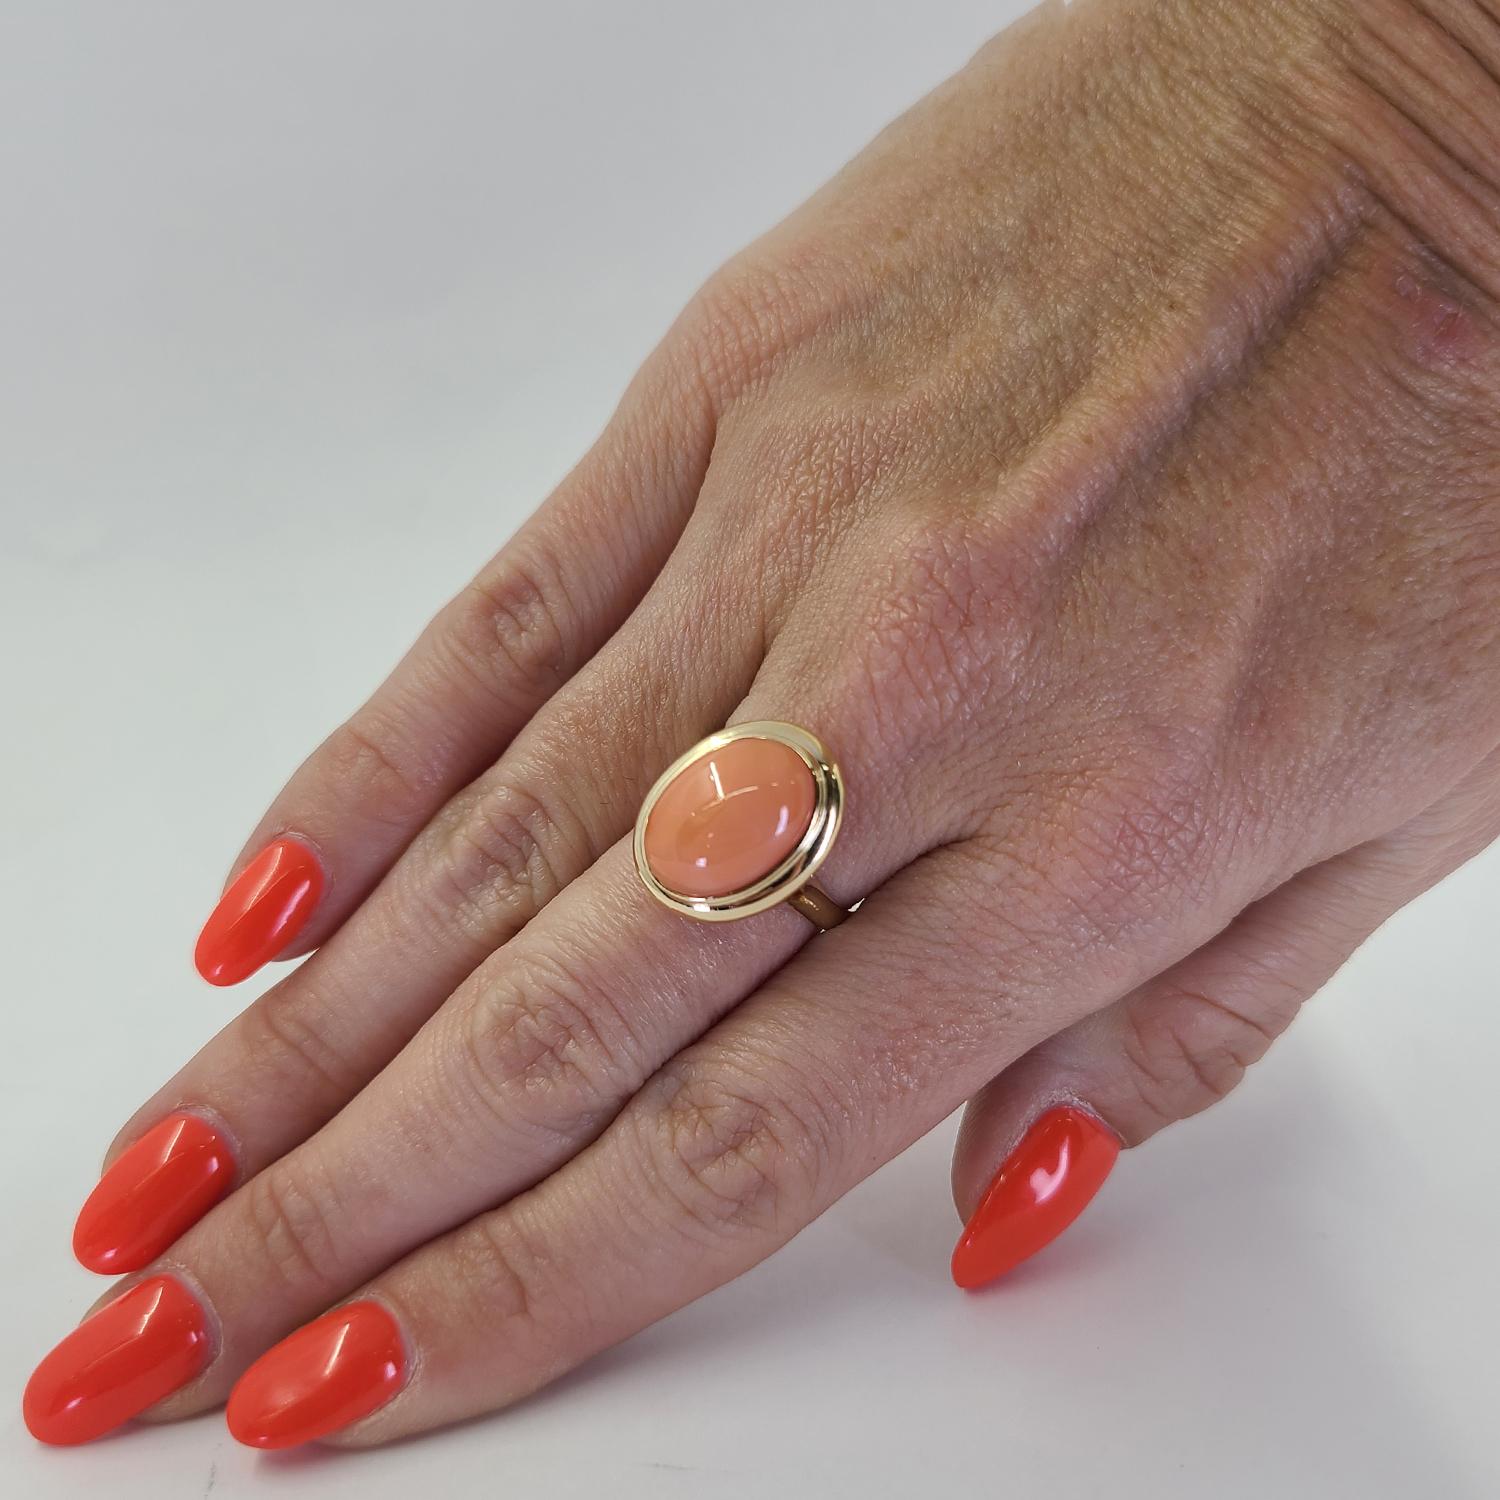 14 Karat Yellow Gold Ring Featuring A Bezel Set 14mm x 10mm Oval Cabochon Cut Coral. Finger Size 6.5. Purchase Includes One Sizing Service Upon Request, Prior to Shipping. Finished Weight Is 3.9 Grams.